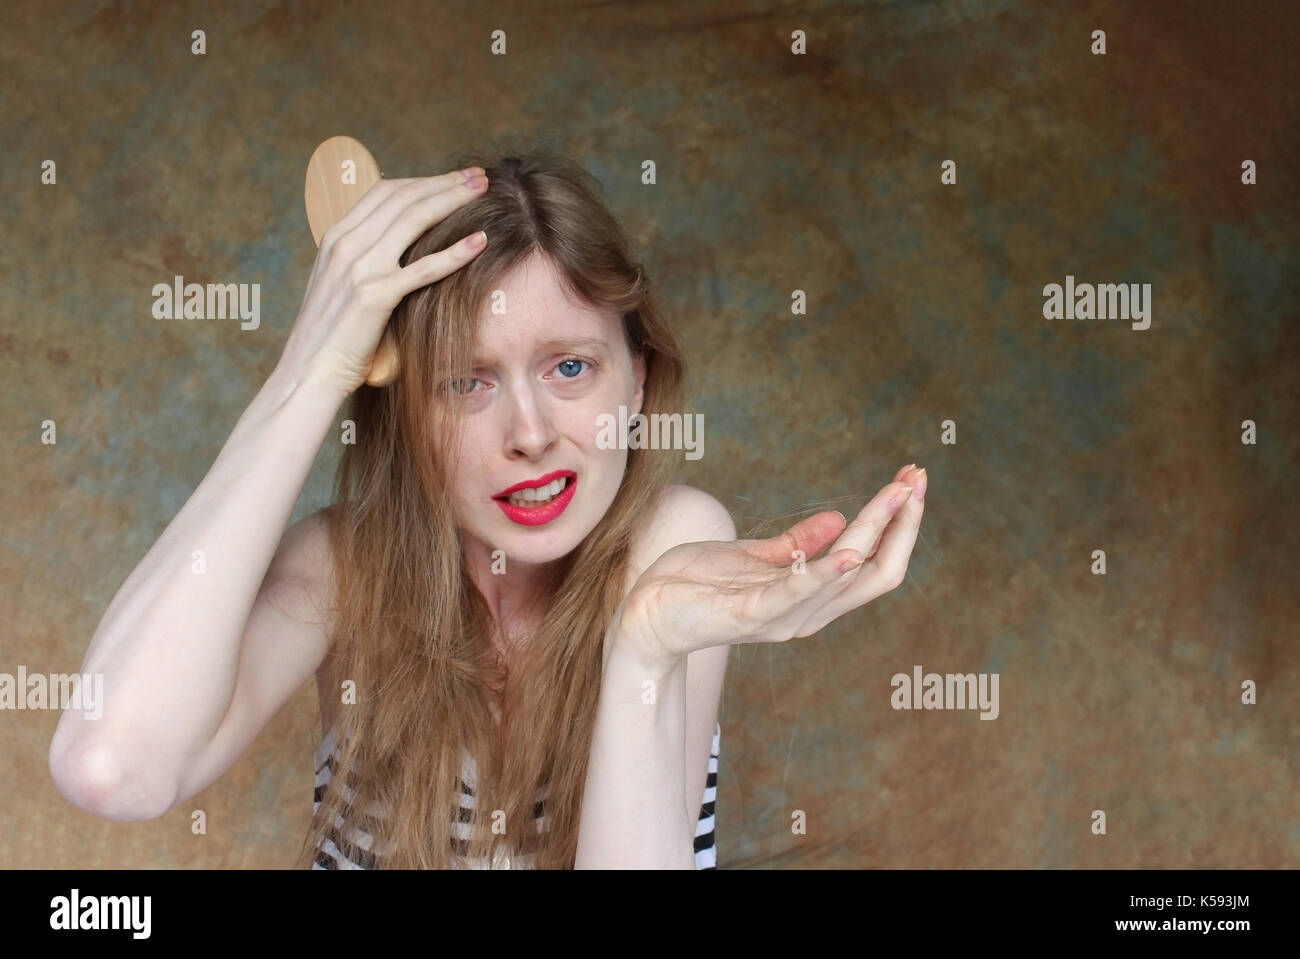 Young woman upset over loosing hair holding fallen out her hand Stock Photo